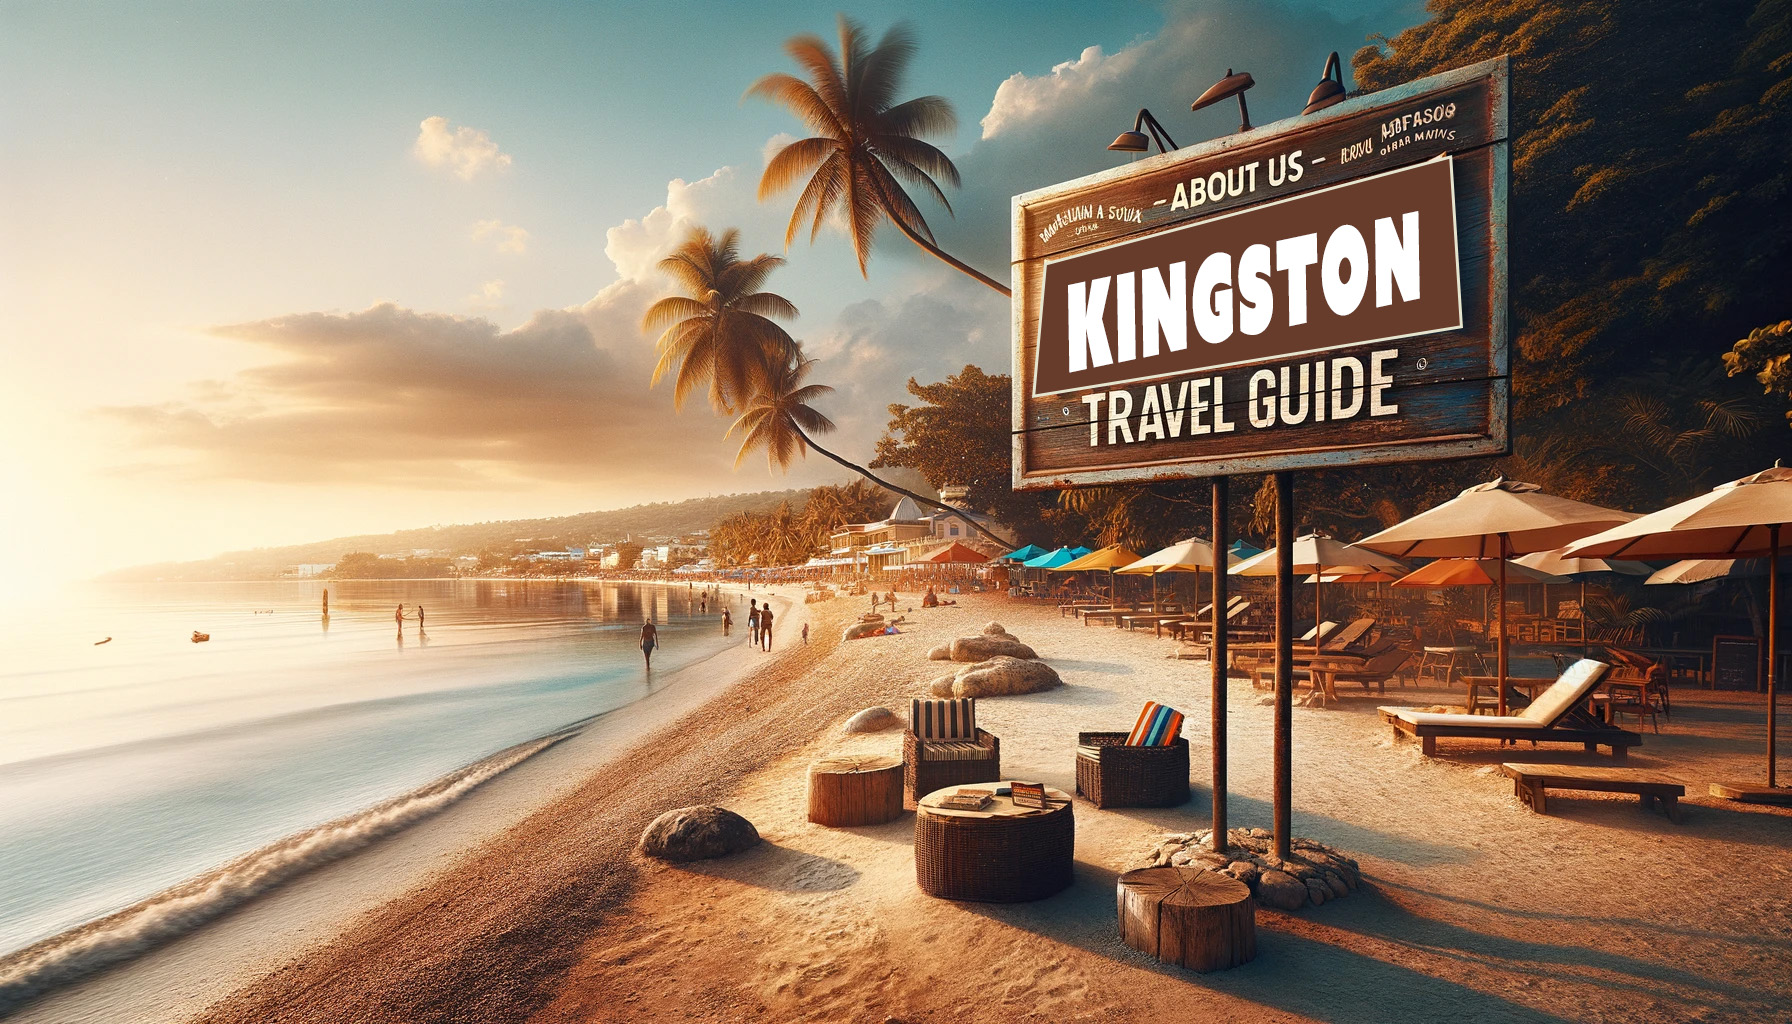 About Us - Kingston Travel Guide